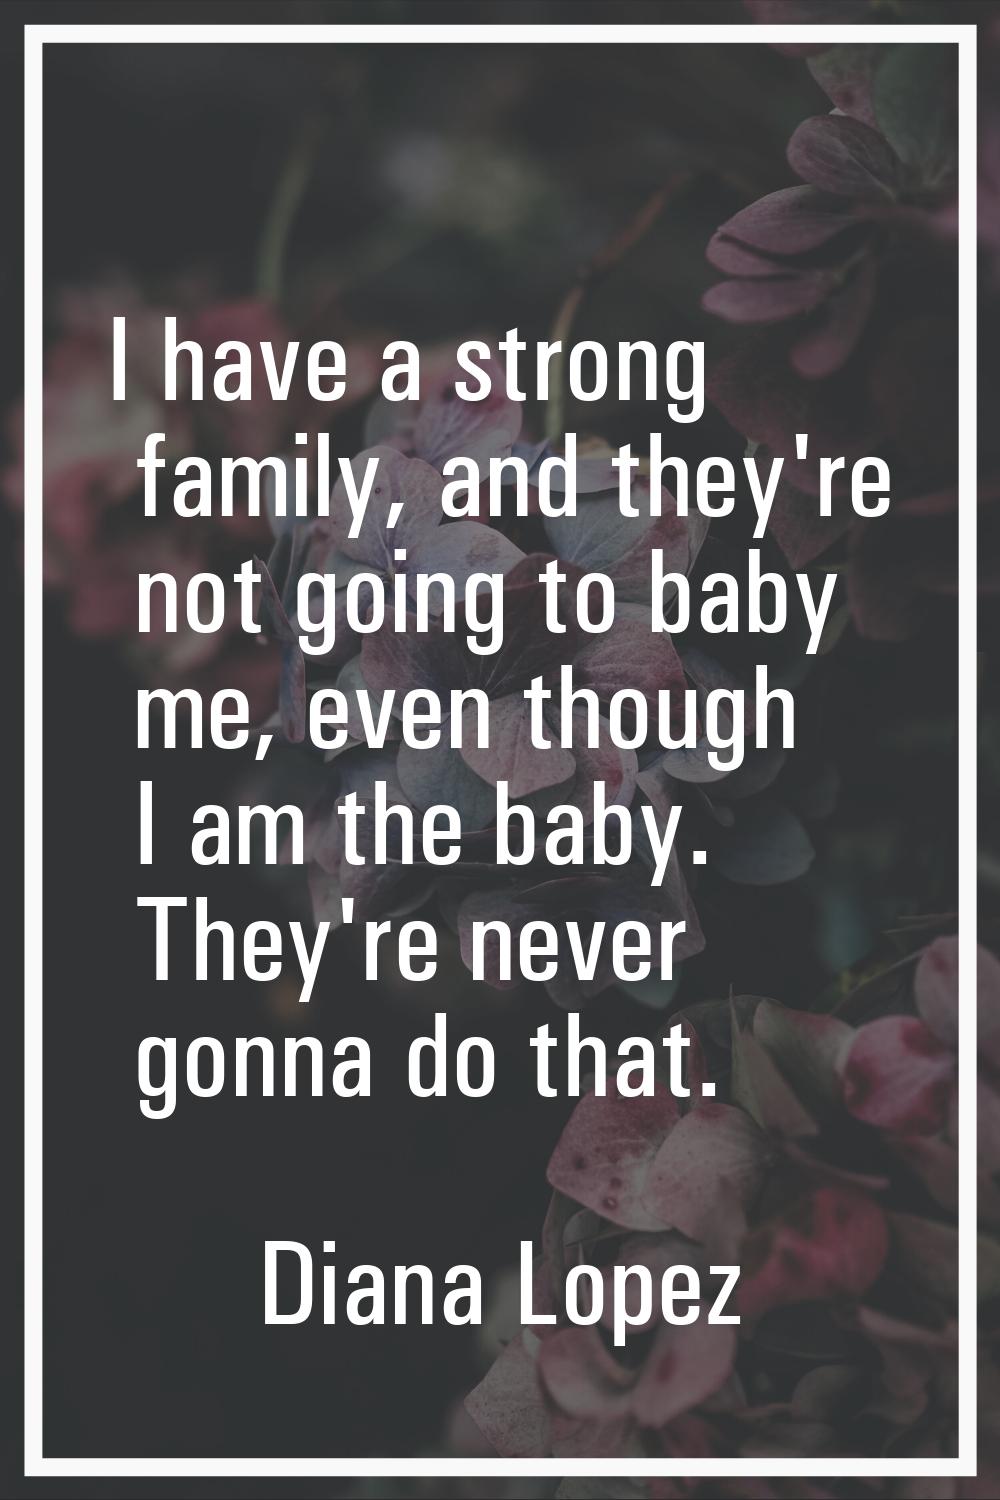 I have a strong family, and they're not going to baby me, even though I am the baby. They're never 